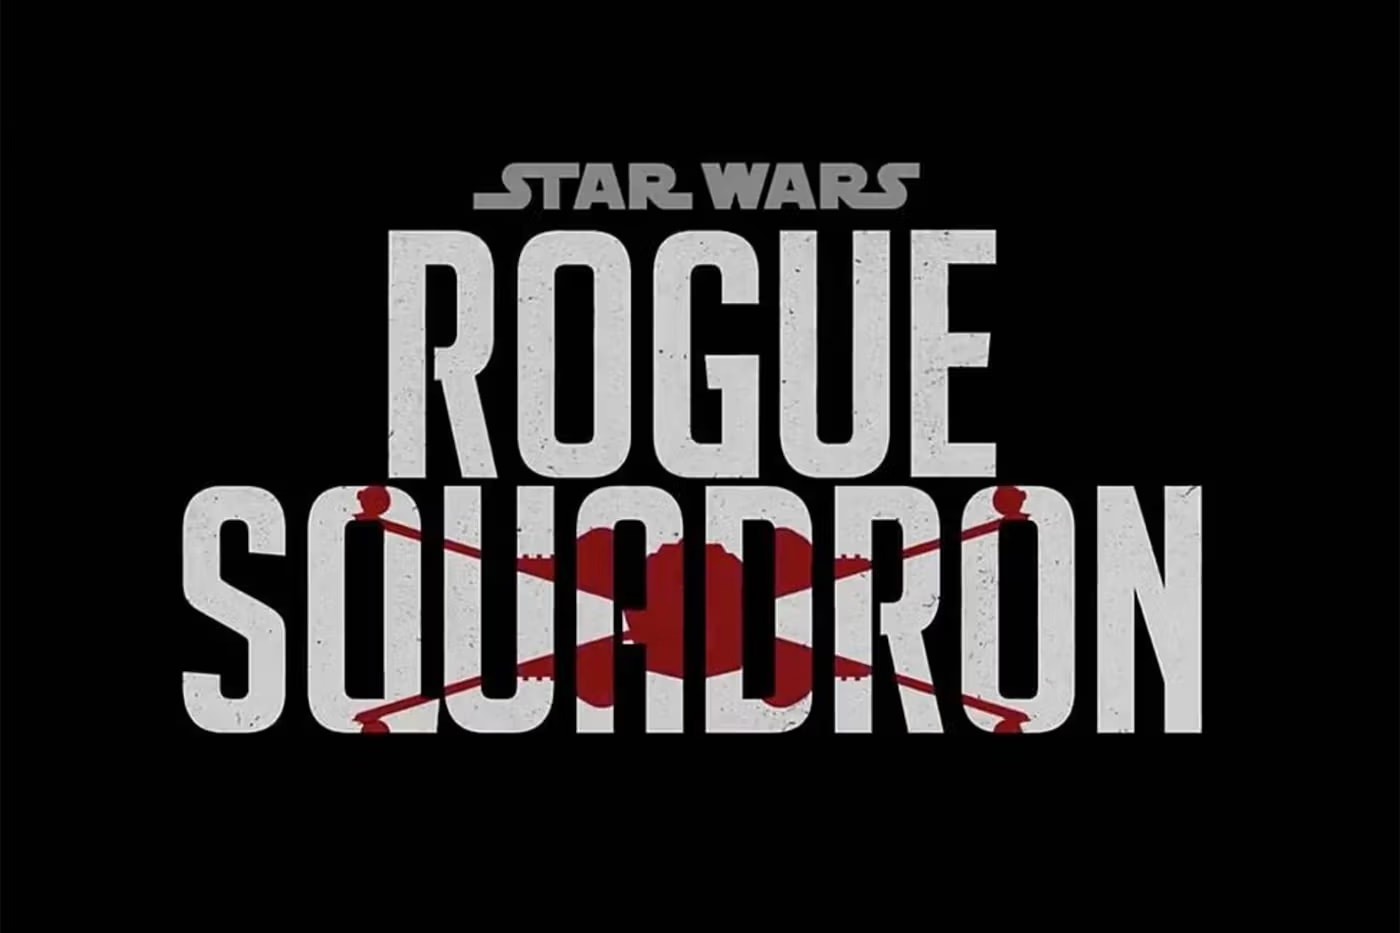 Patty Jenkins Confirms She Is Back To Working on 'Star Wars' Film 'Rogue Squadron' disney lucasfilm kevin feige